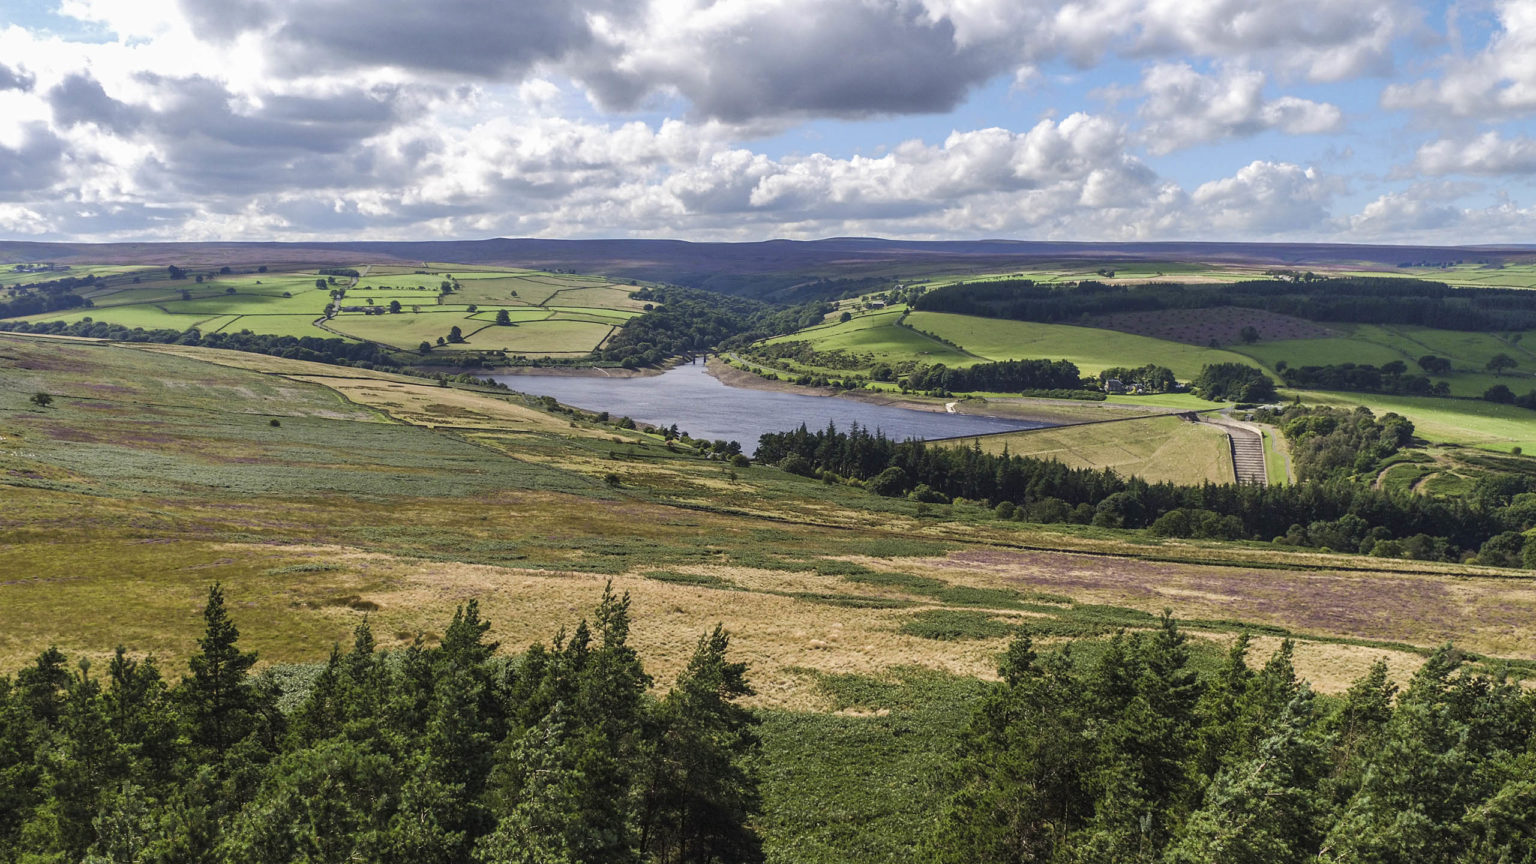 Countryside landscape and Leighton Reservoir on the Swinton Estate in North Yorkshire